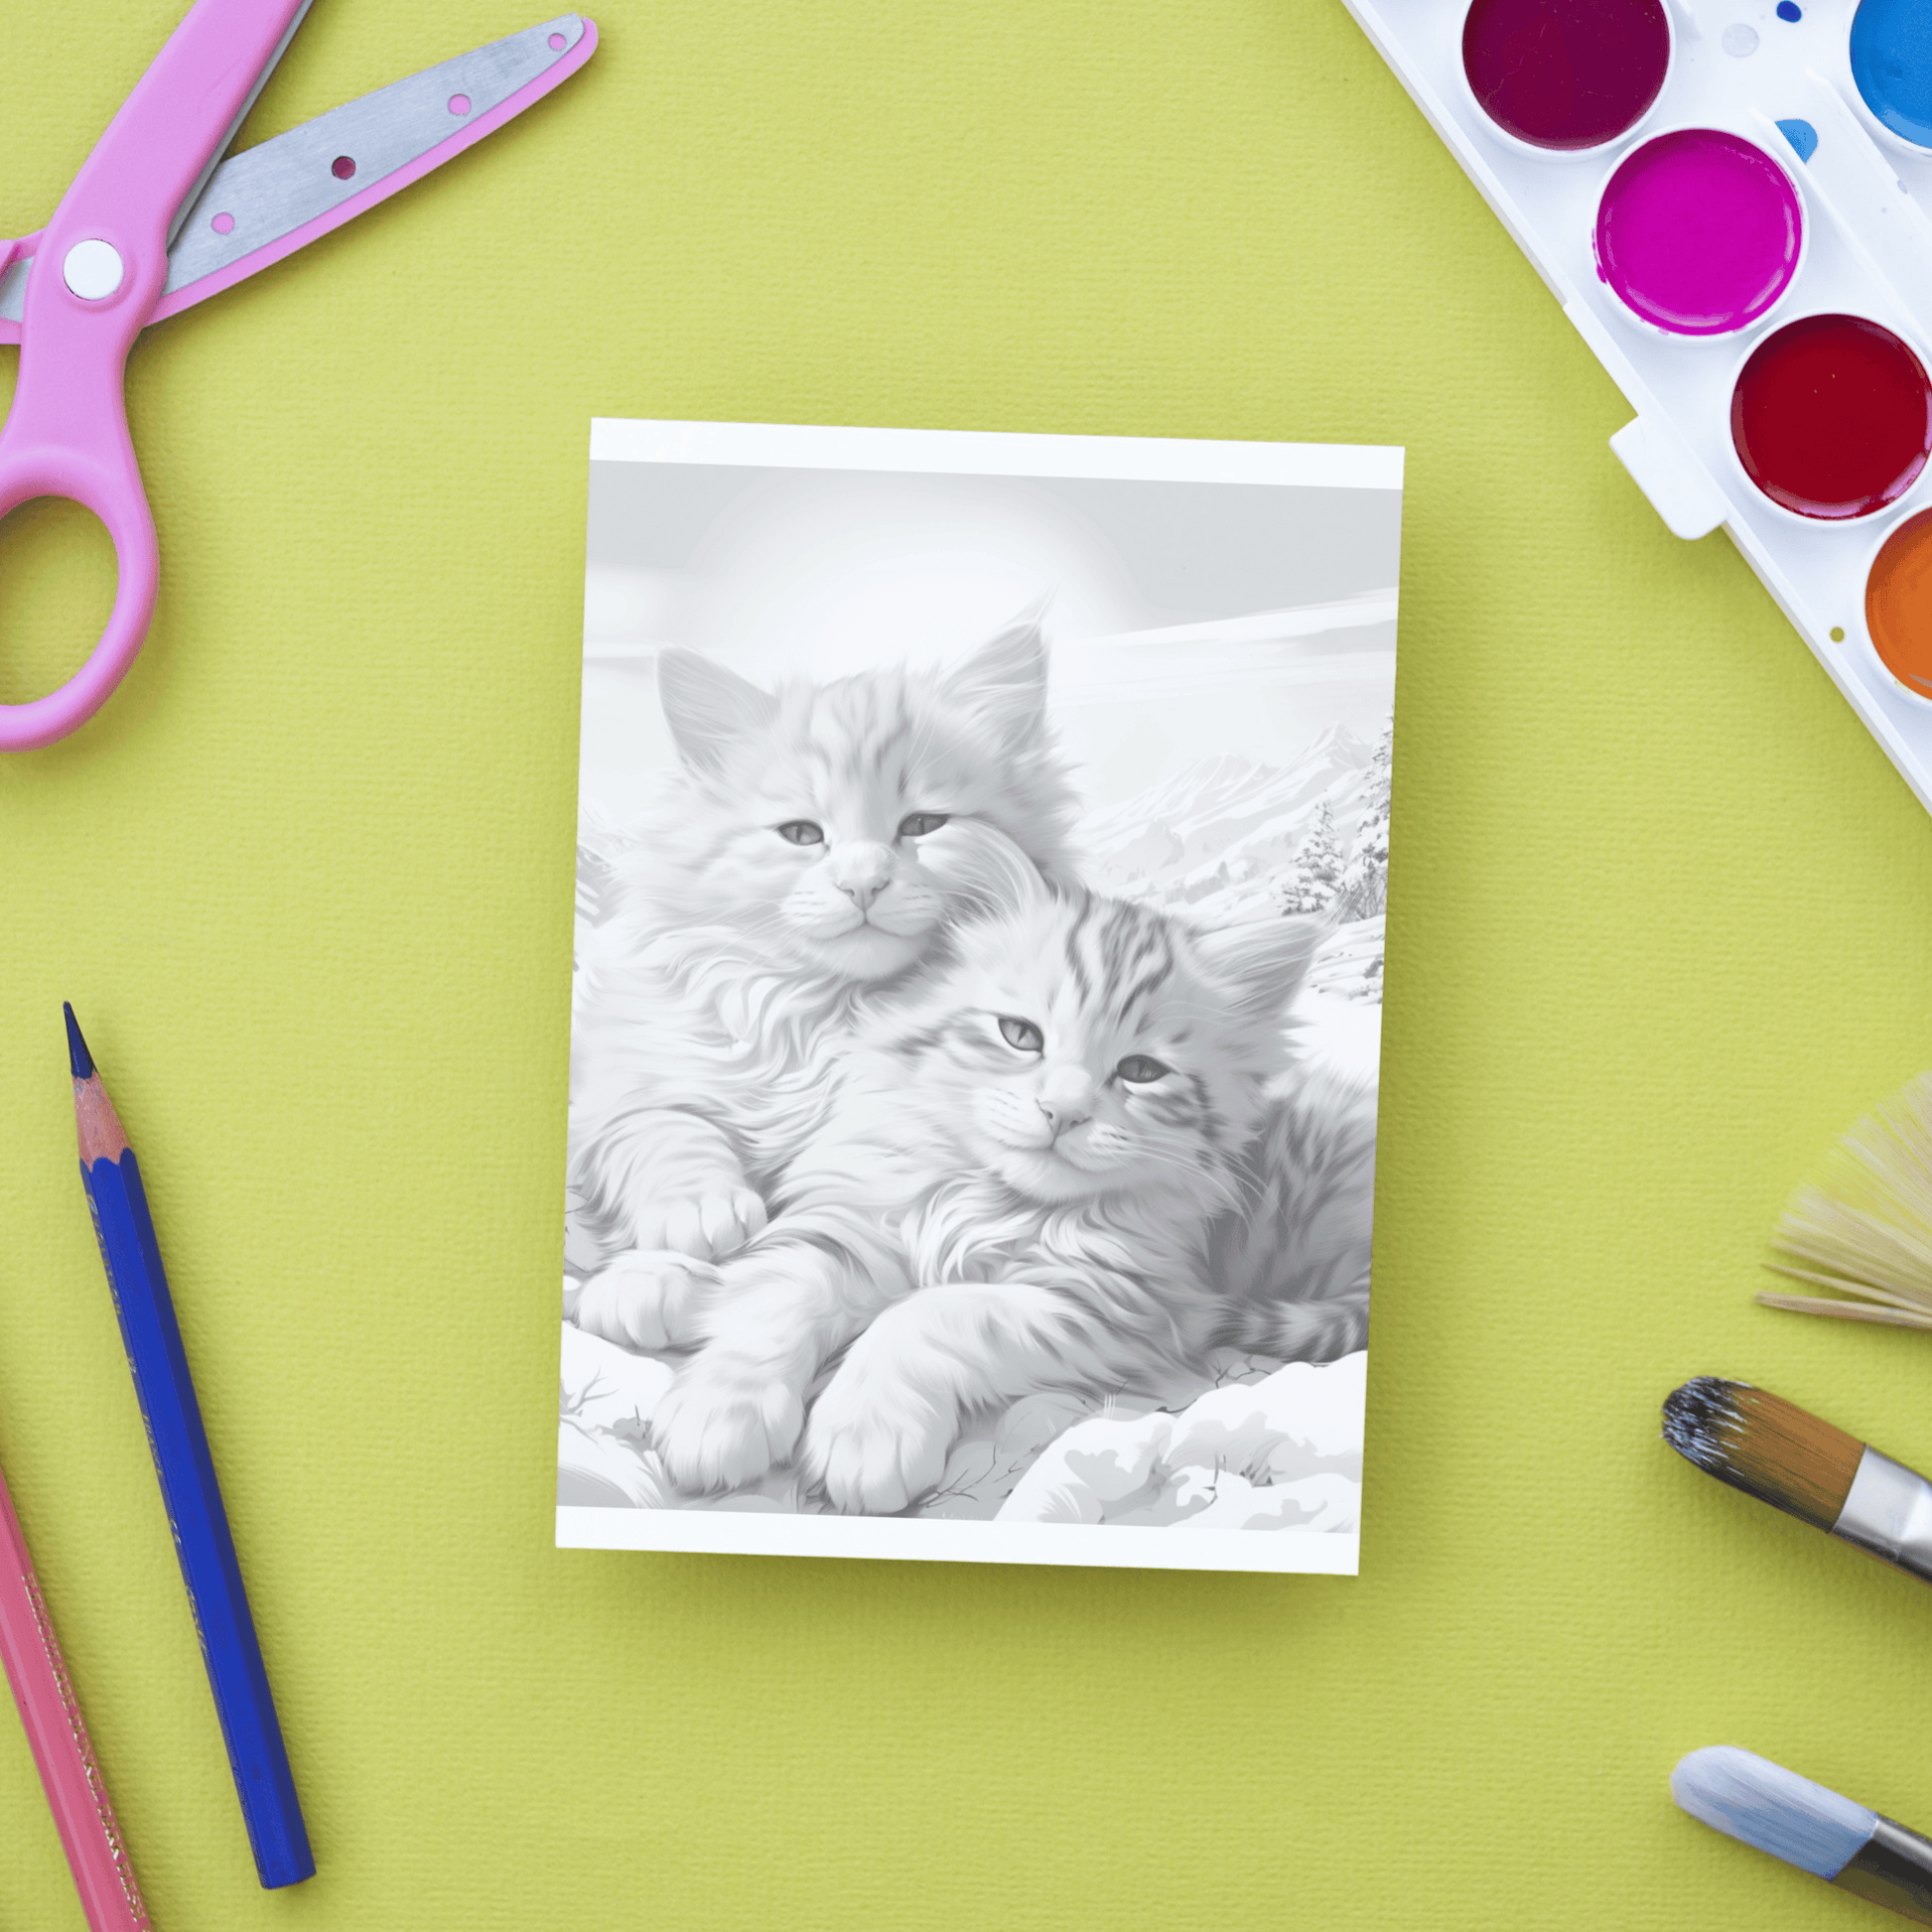 Realistic Cat Coloring Book 1: Cat Print Out Demo